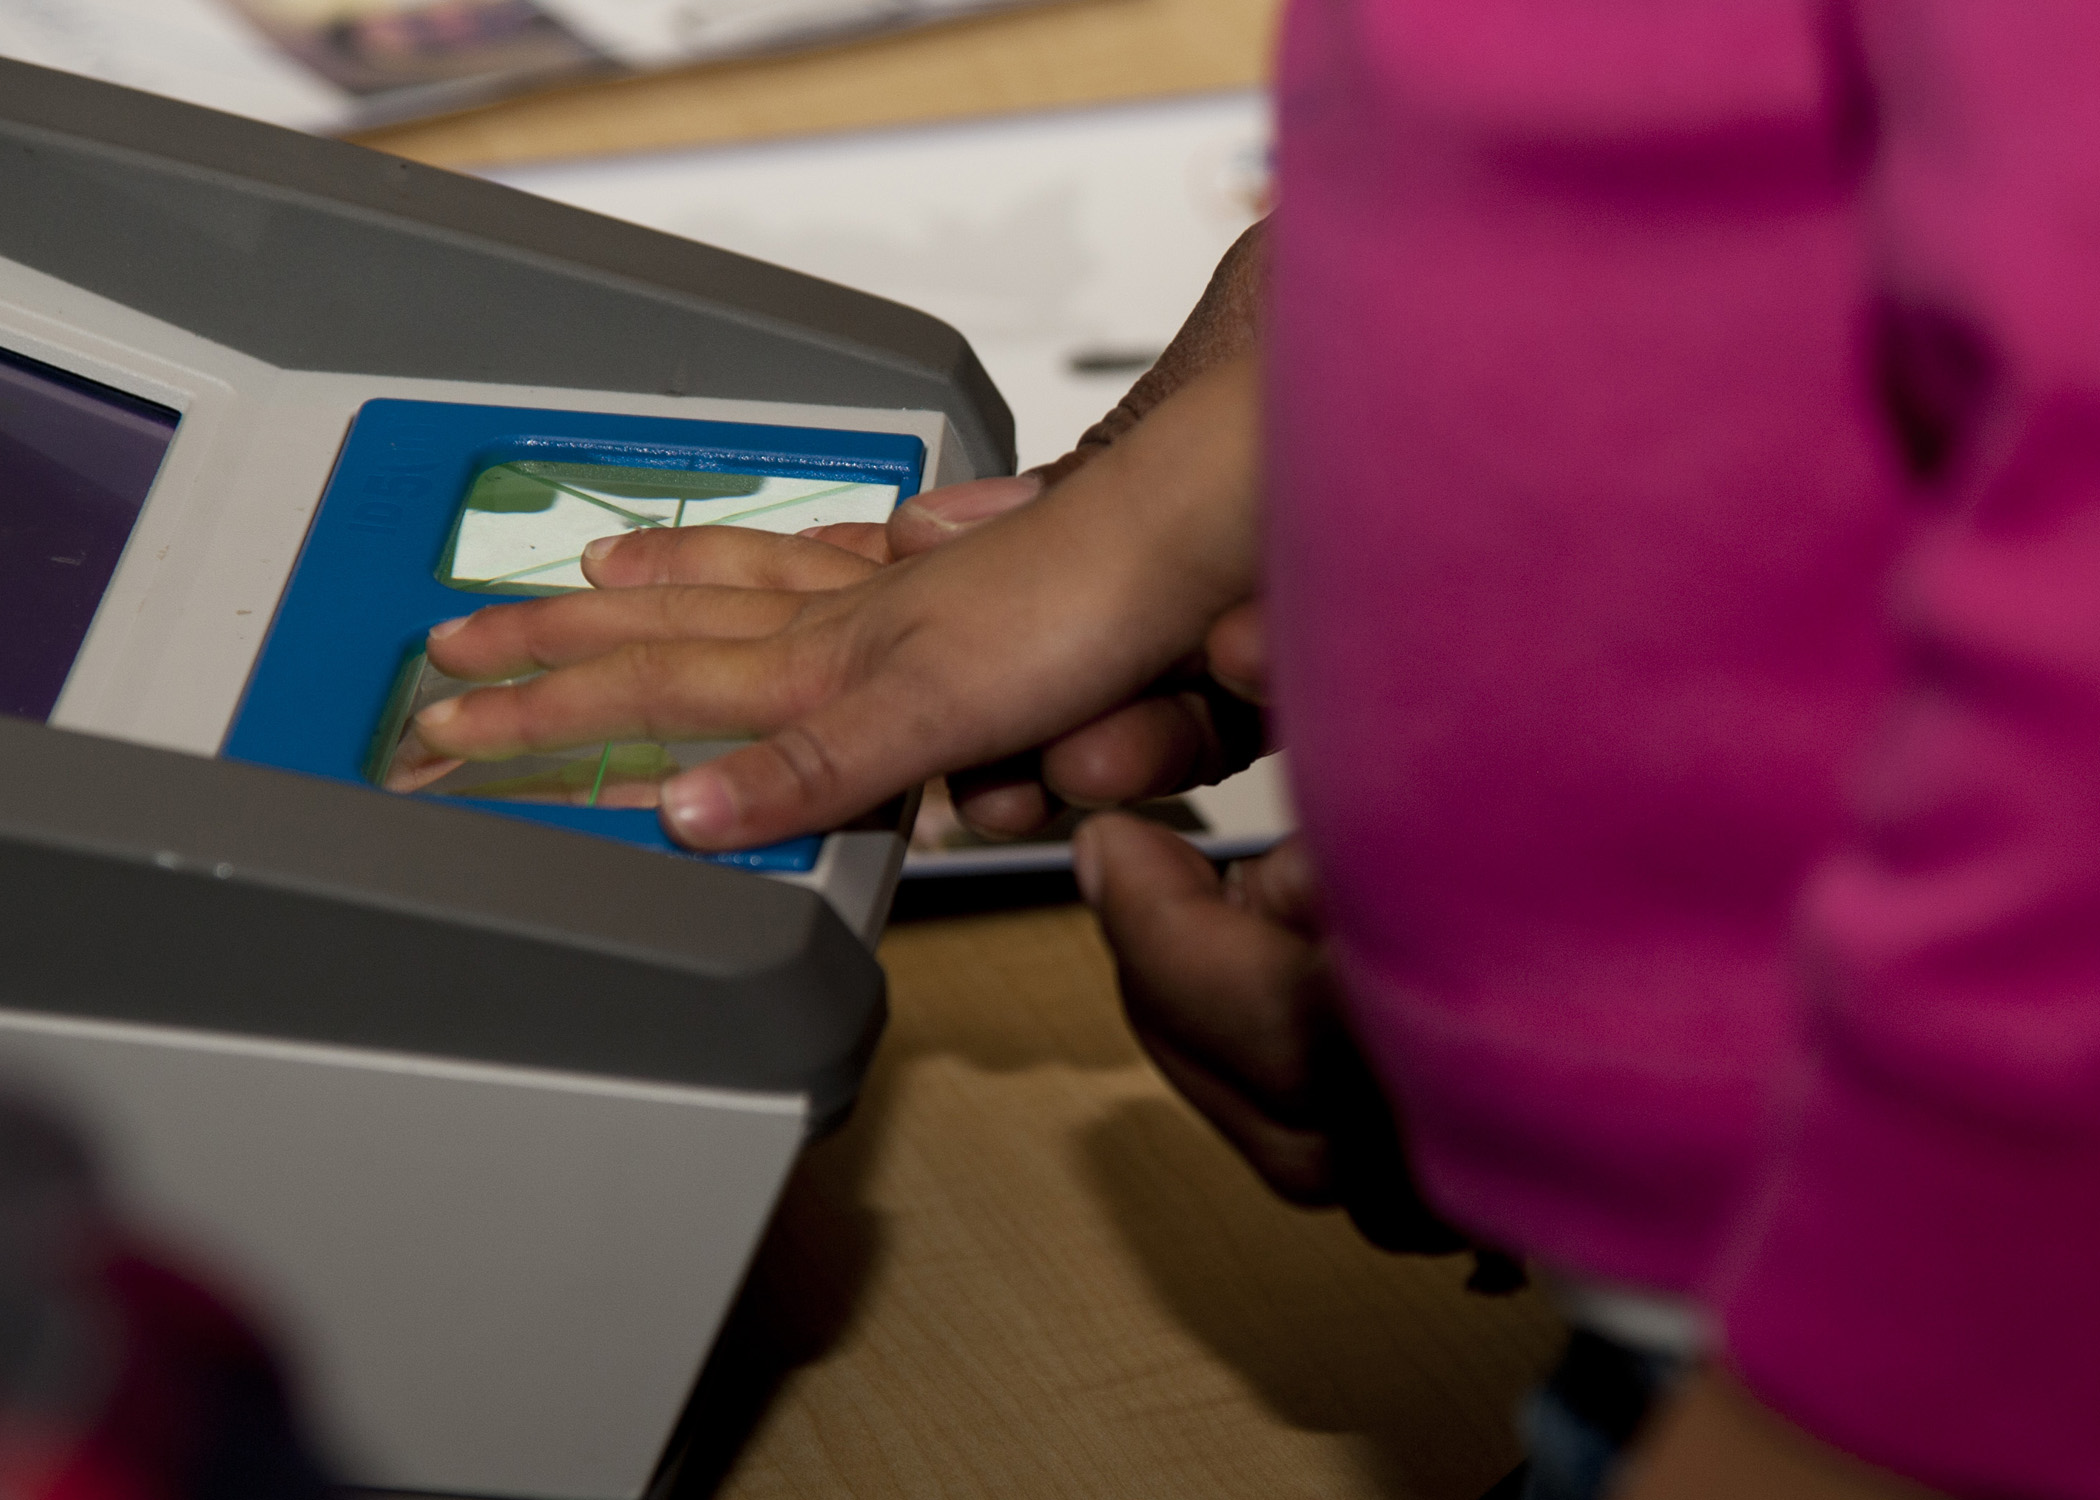 An individual's hand is held to a scanning machine for fingerprinting.